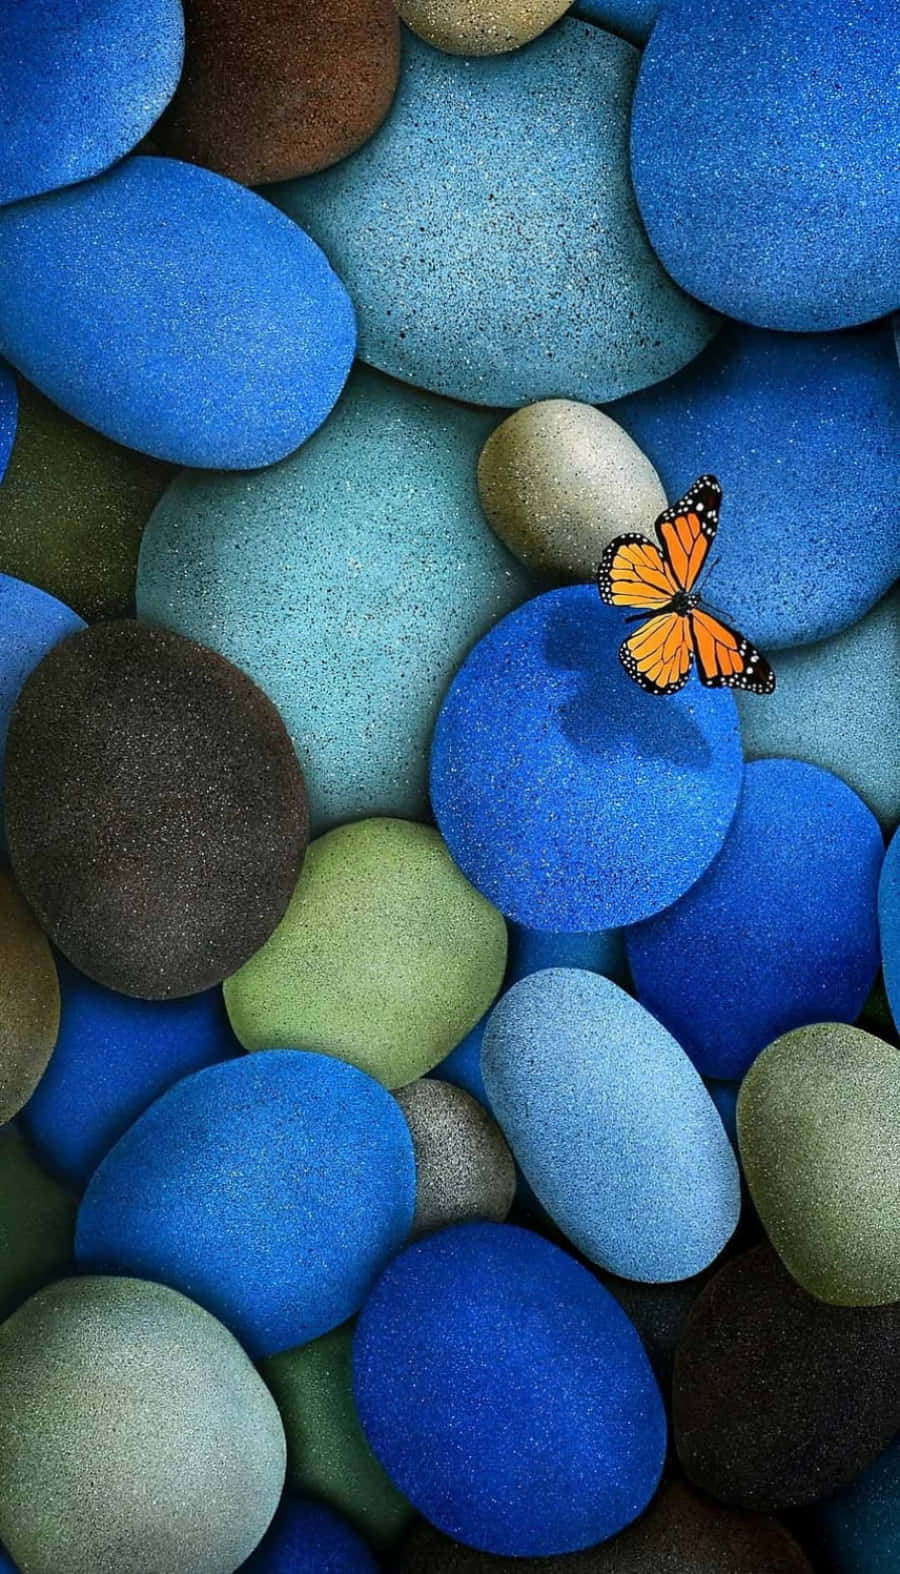 A Butterfly Is Sitting On A Blue Pebble